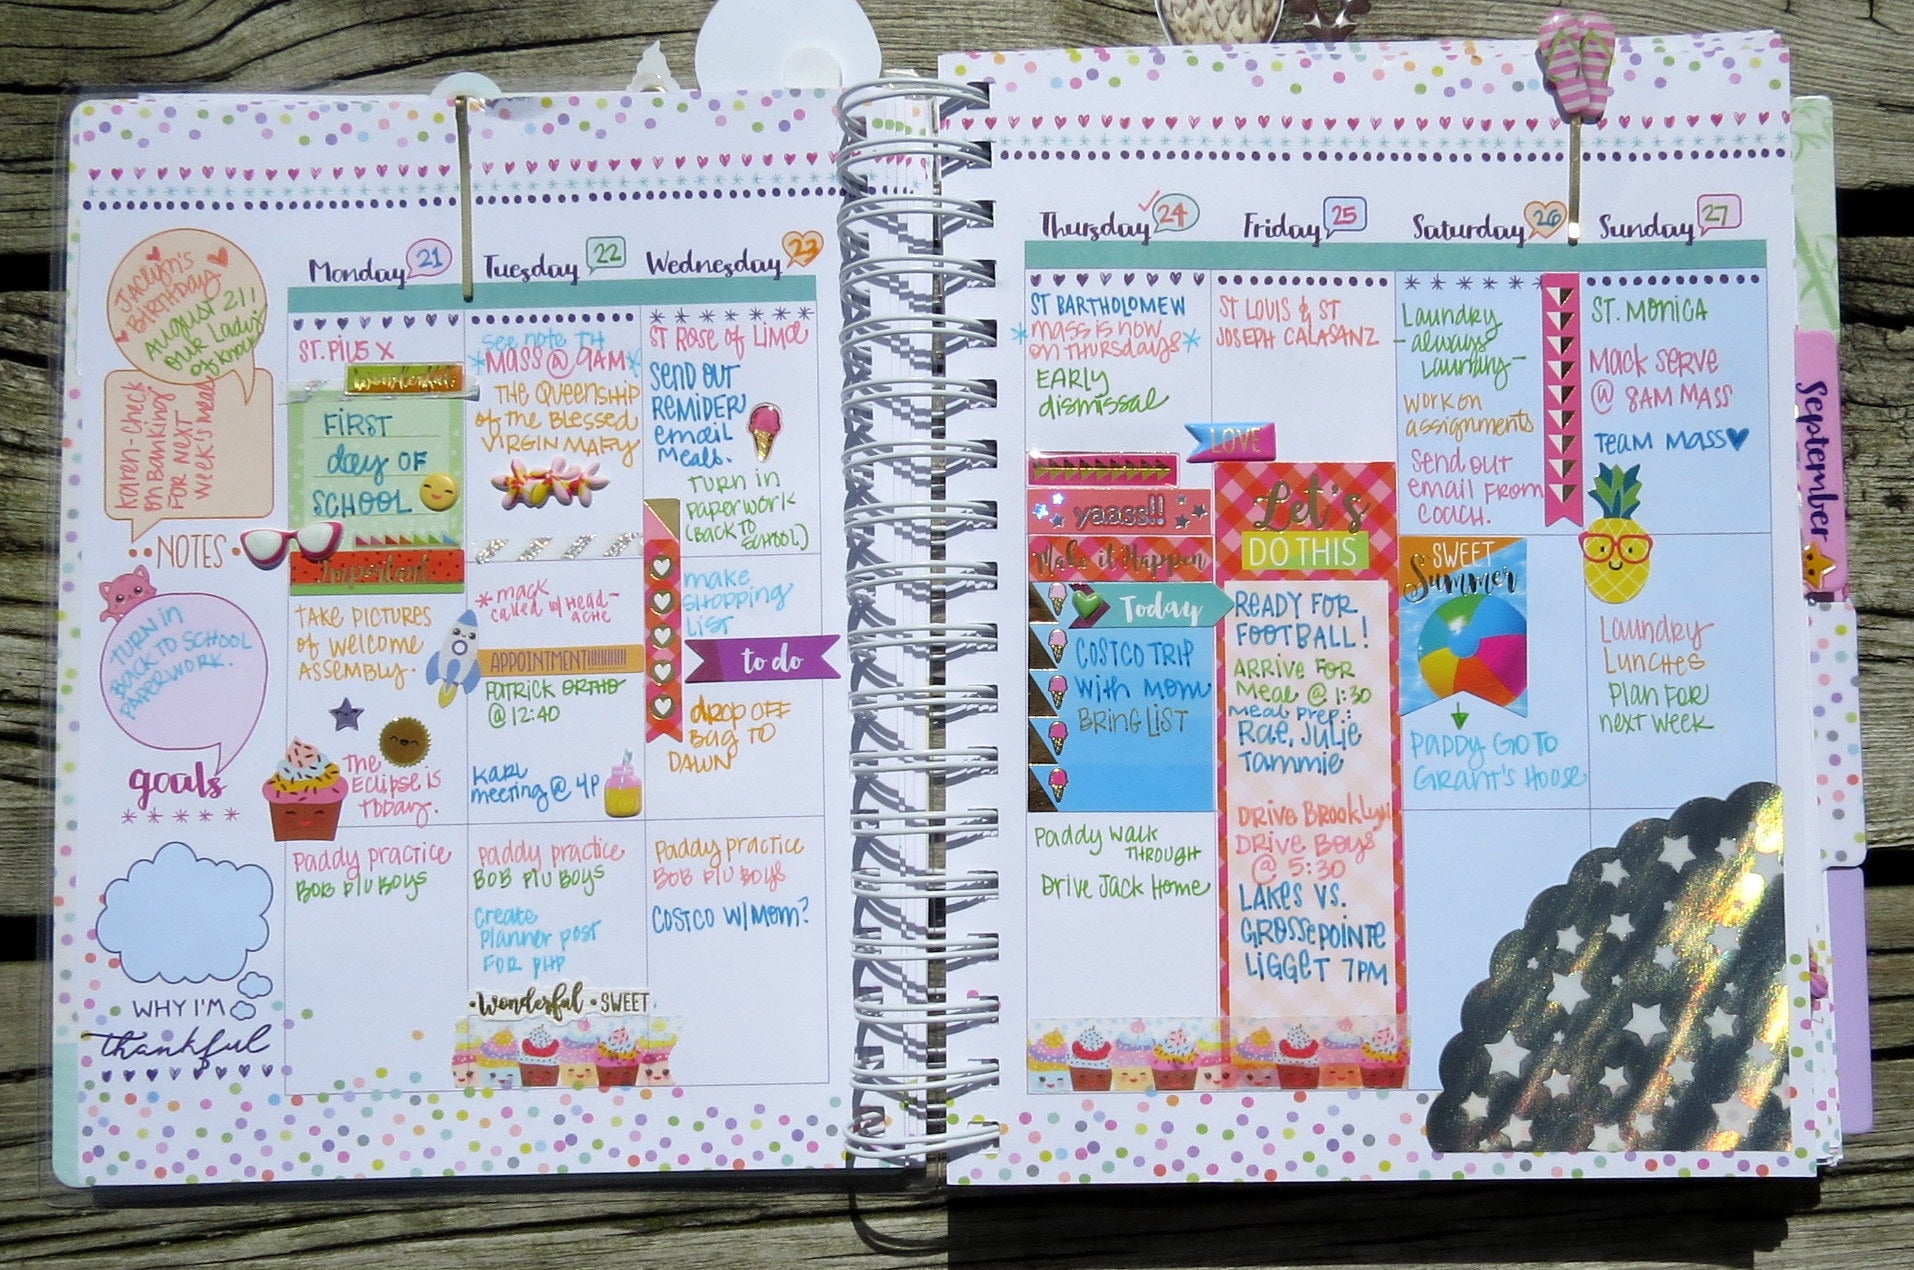 PHP PLANNER POST WEEKLY 3, SHANNON M.